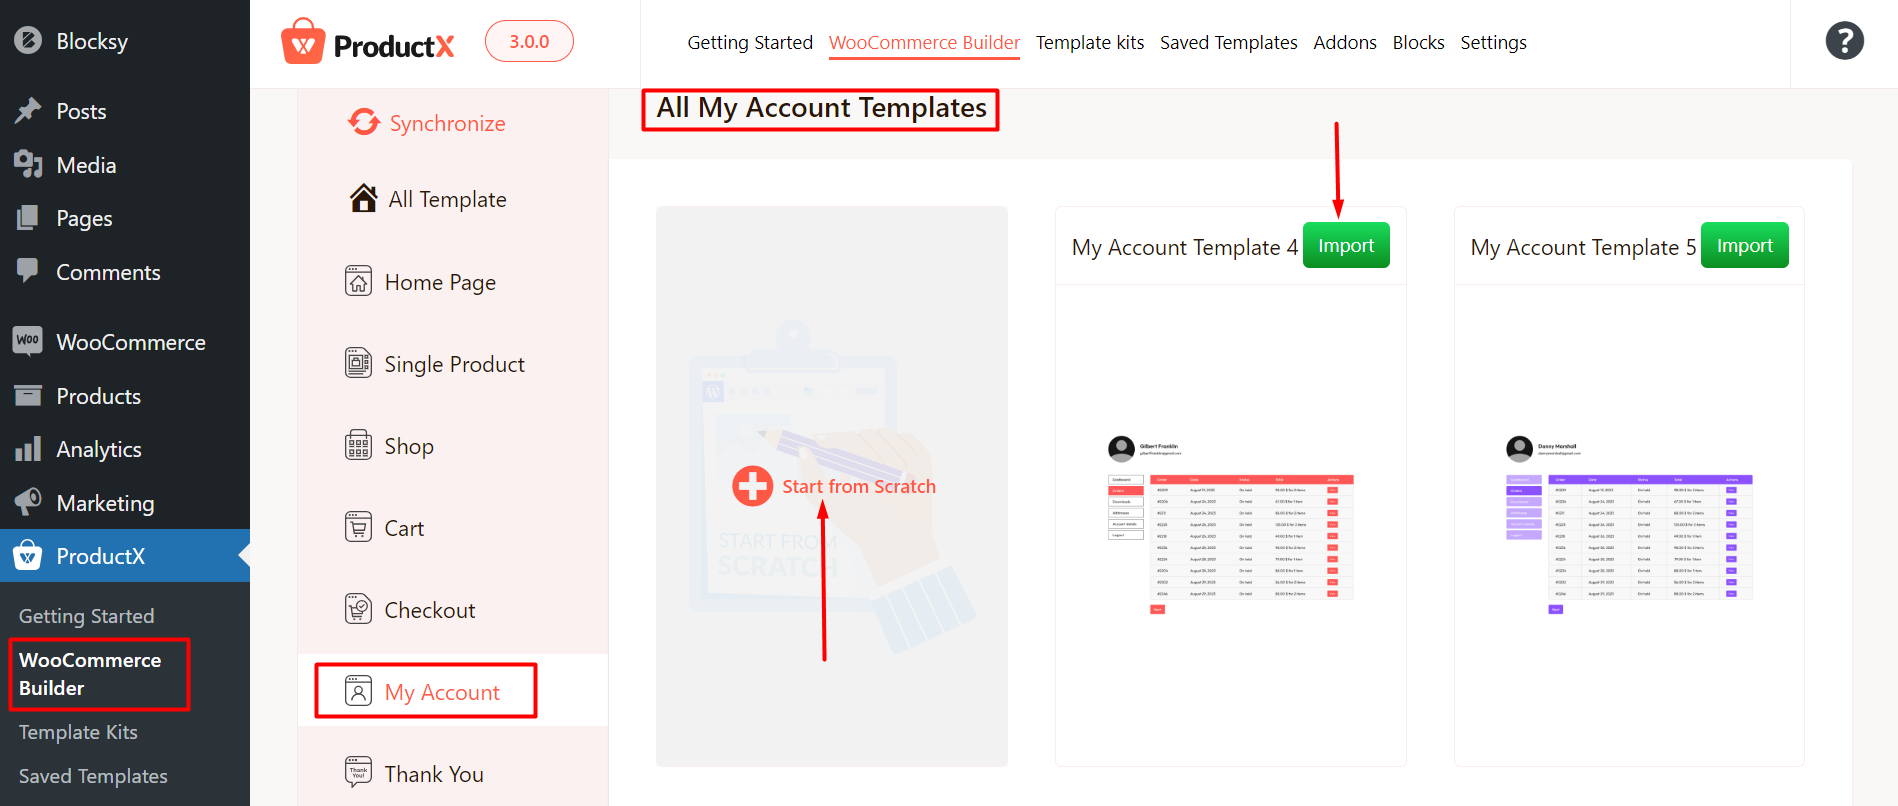 WooCommerce "My Account Page" Template Creation 